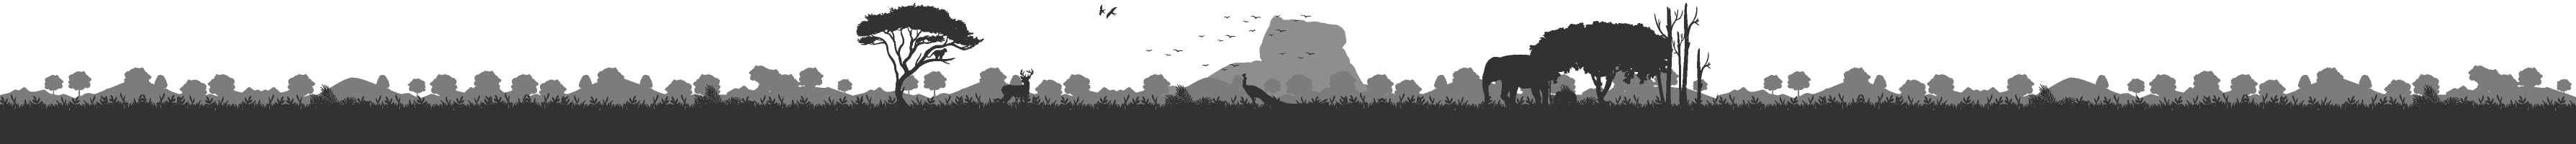 A vector image of the sigiriya mountain with animals and birds in the foreground and background.